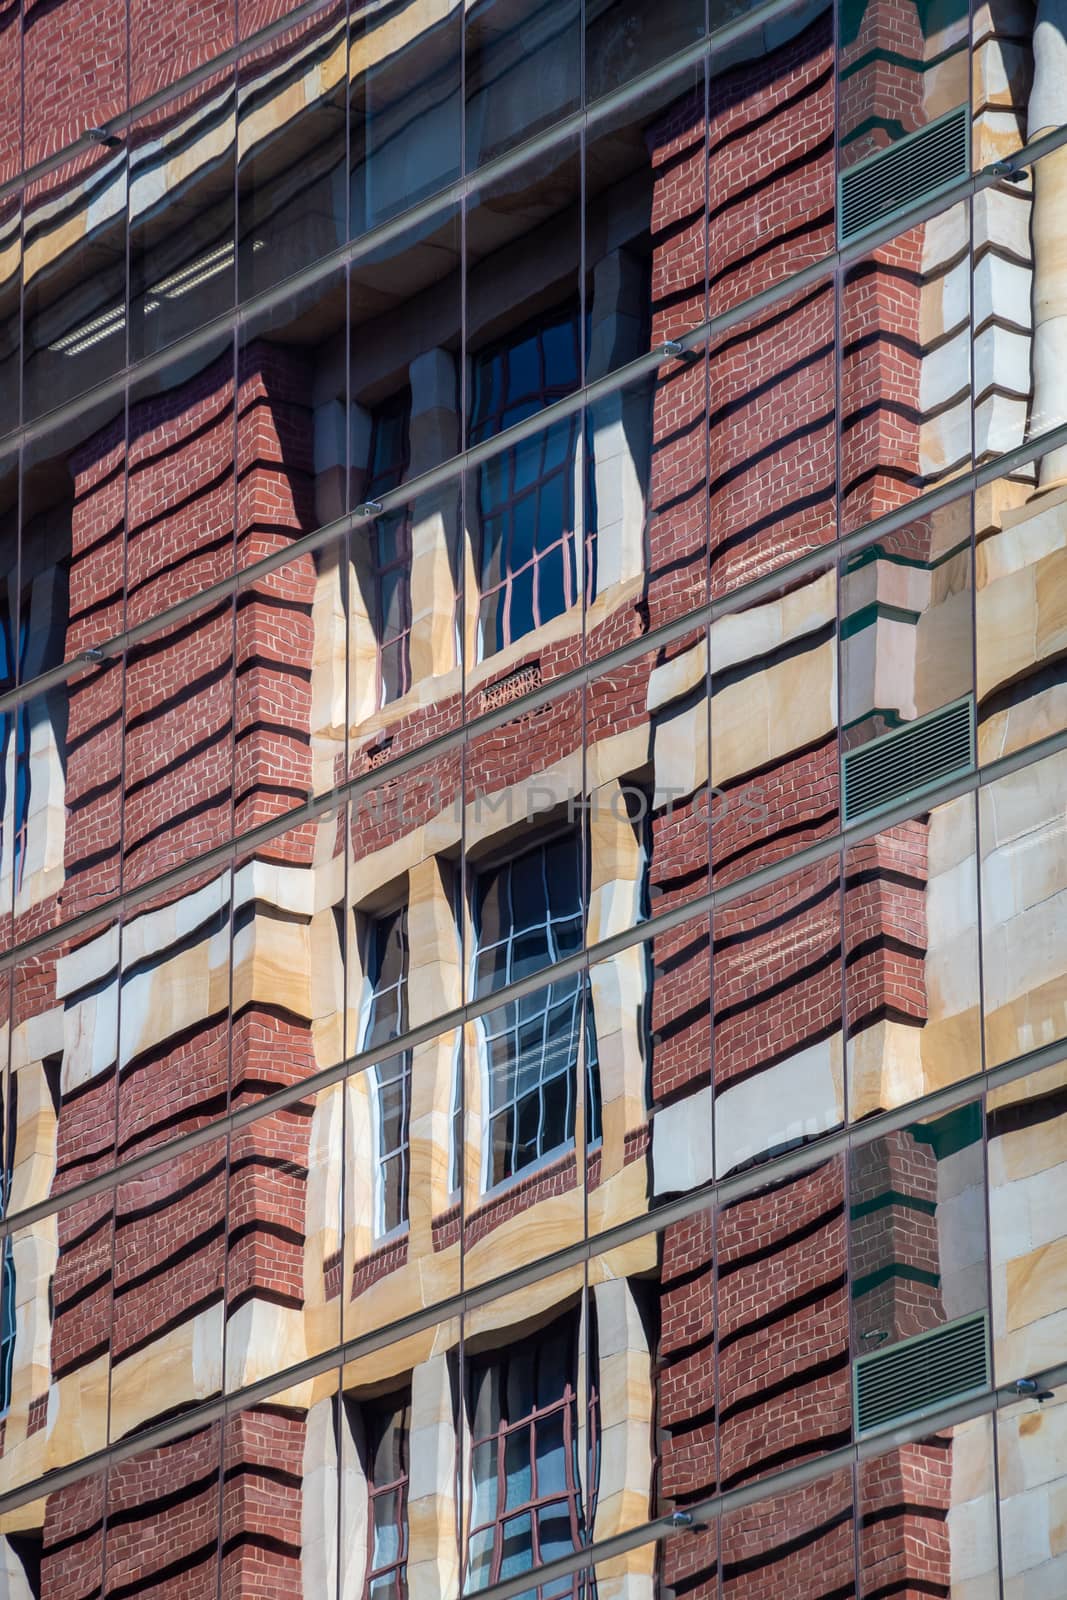 Reflection of brick building in modern skyscraper facade with reflective windows by MXW_Stock